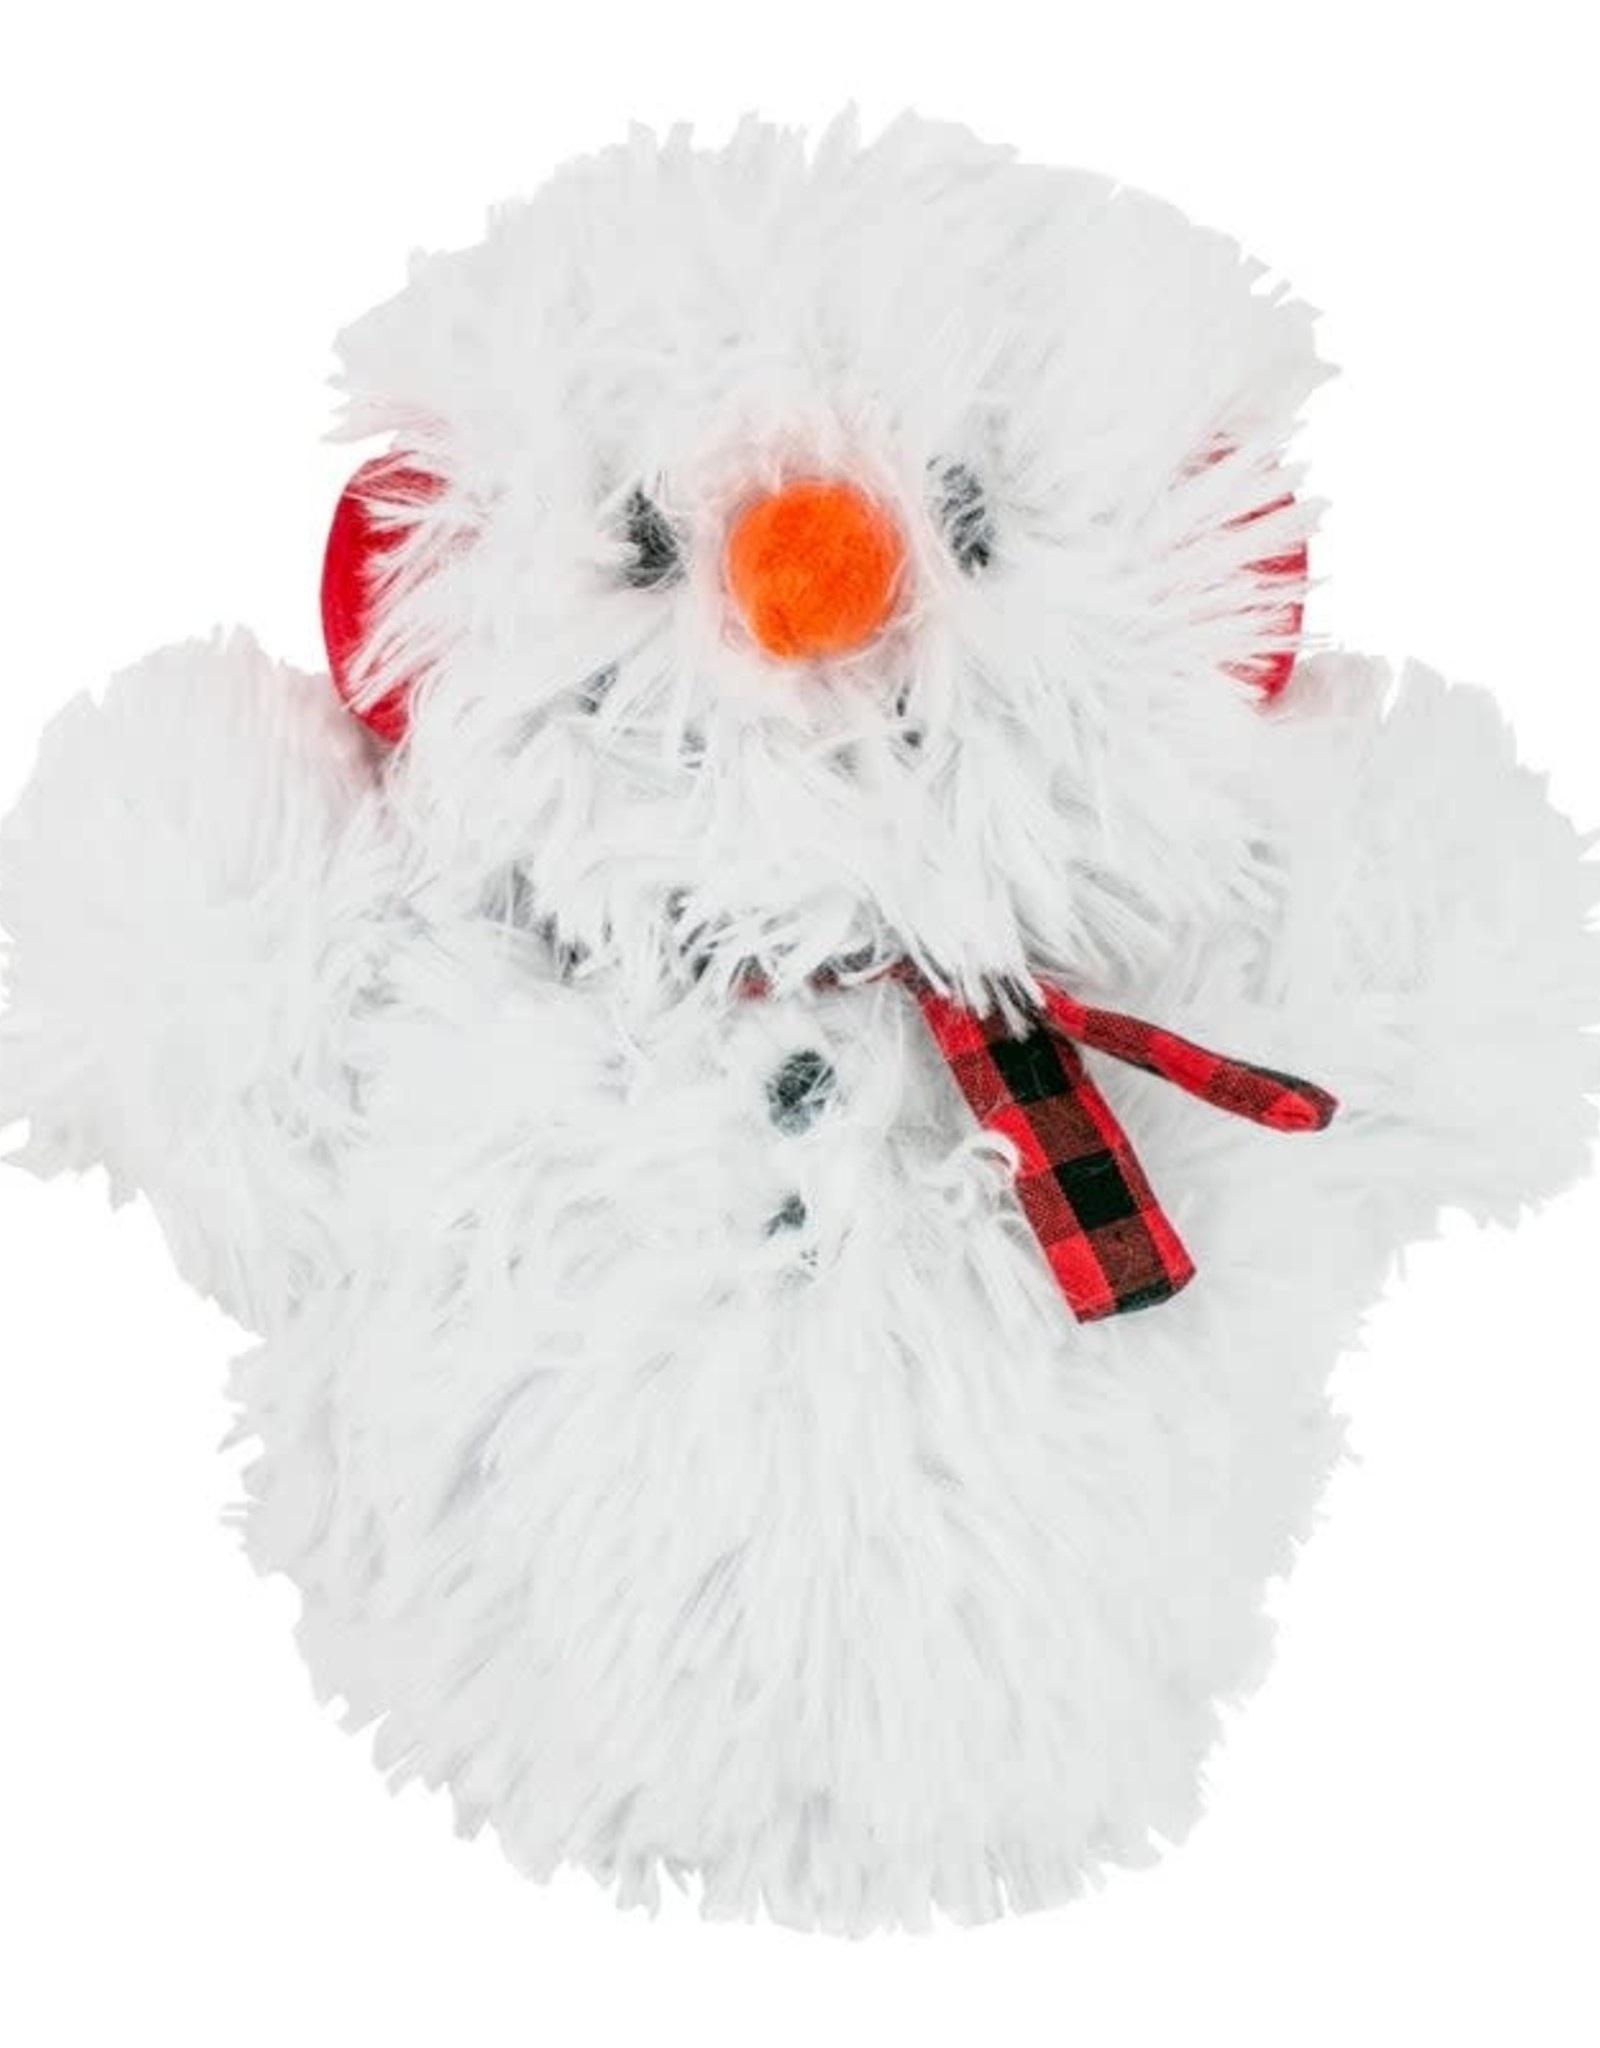 Tall Tails Tall Tails Holiday Fluffy Snowman 8"